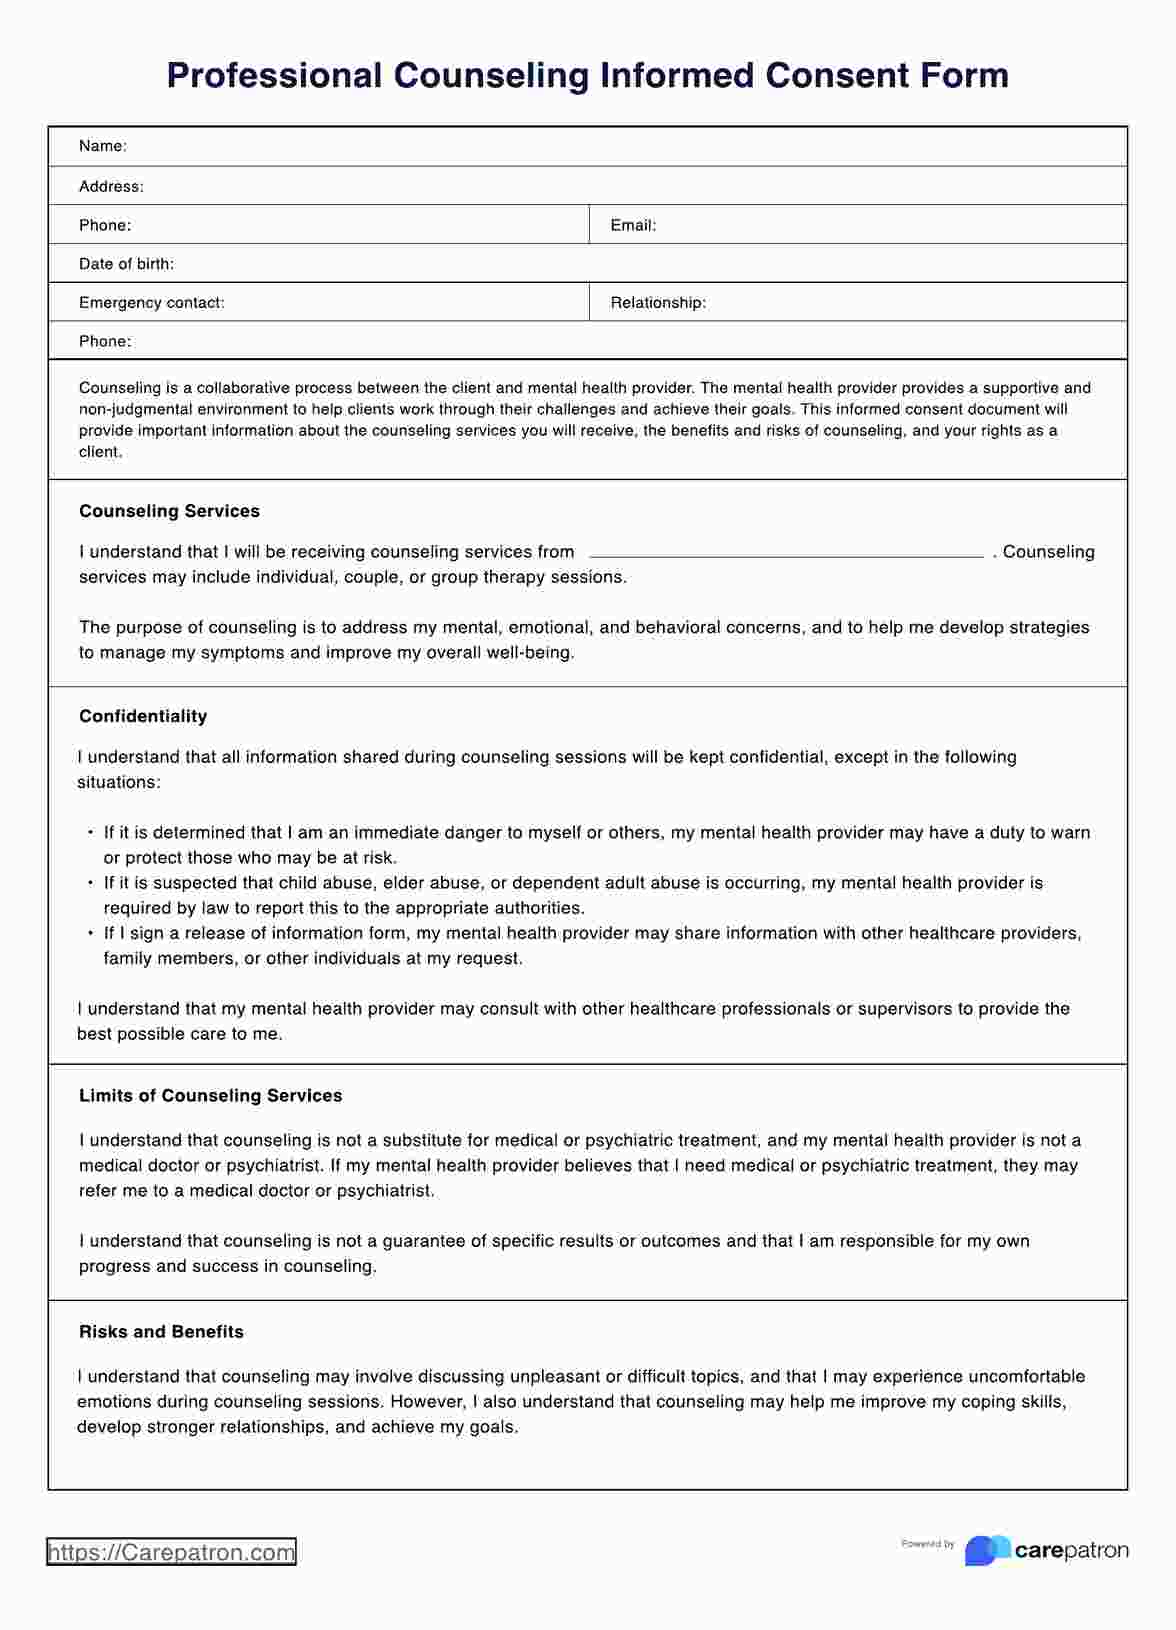 Professional Counseling Informed Consent Form PDF Example